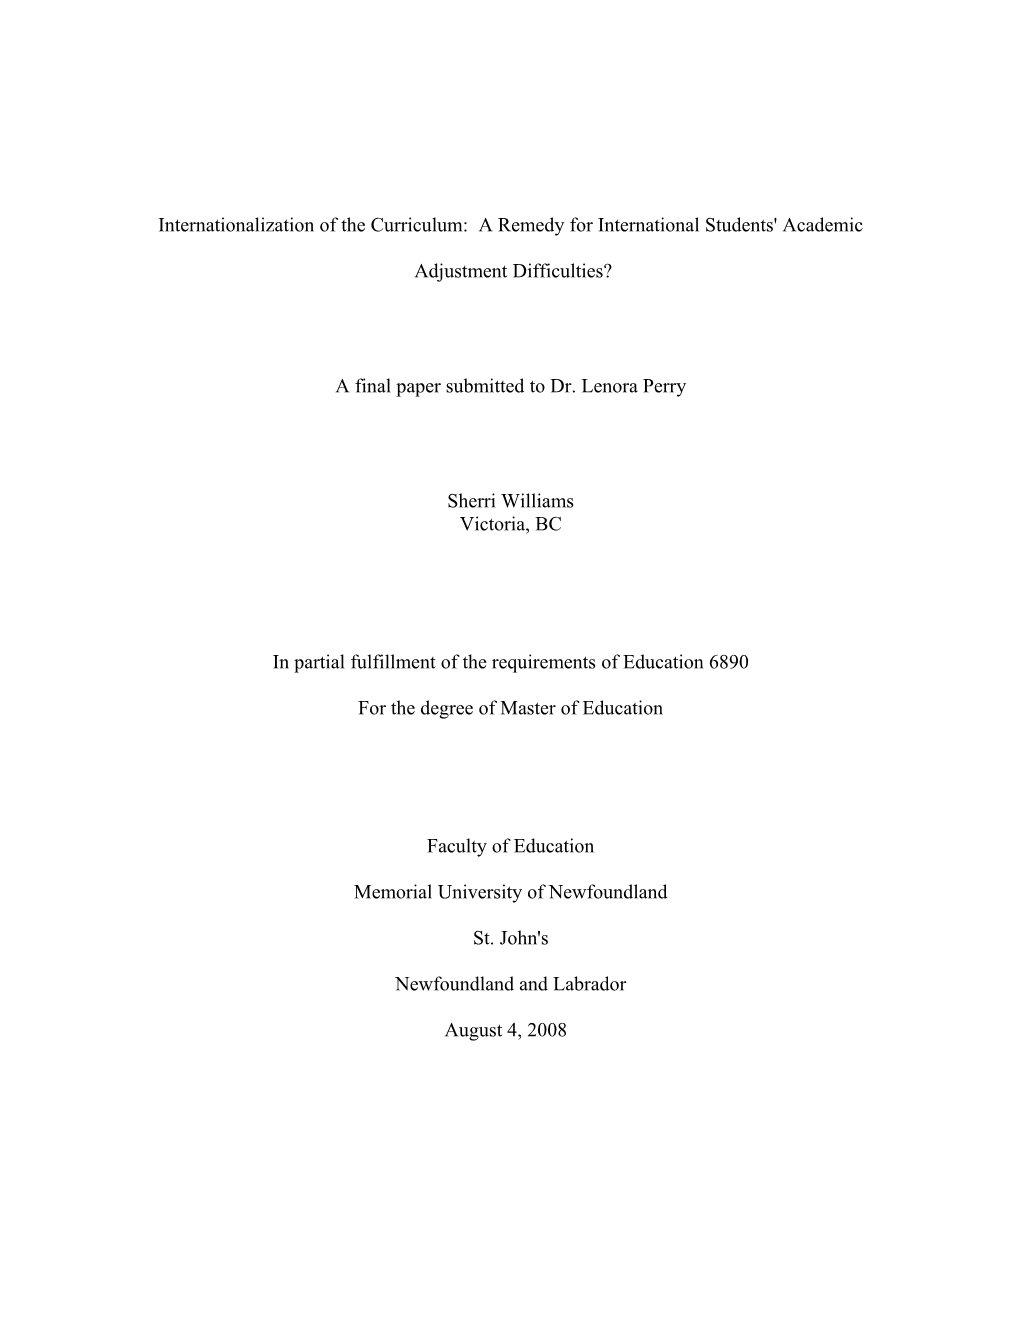 Internationalization Of The Curriculum: Friend Or Foe To International Students